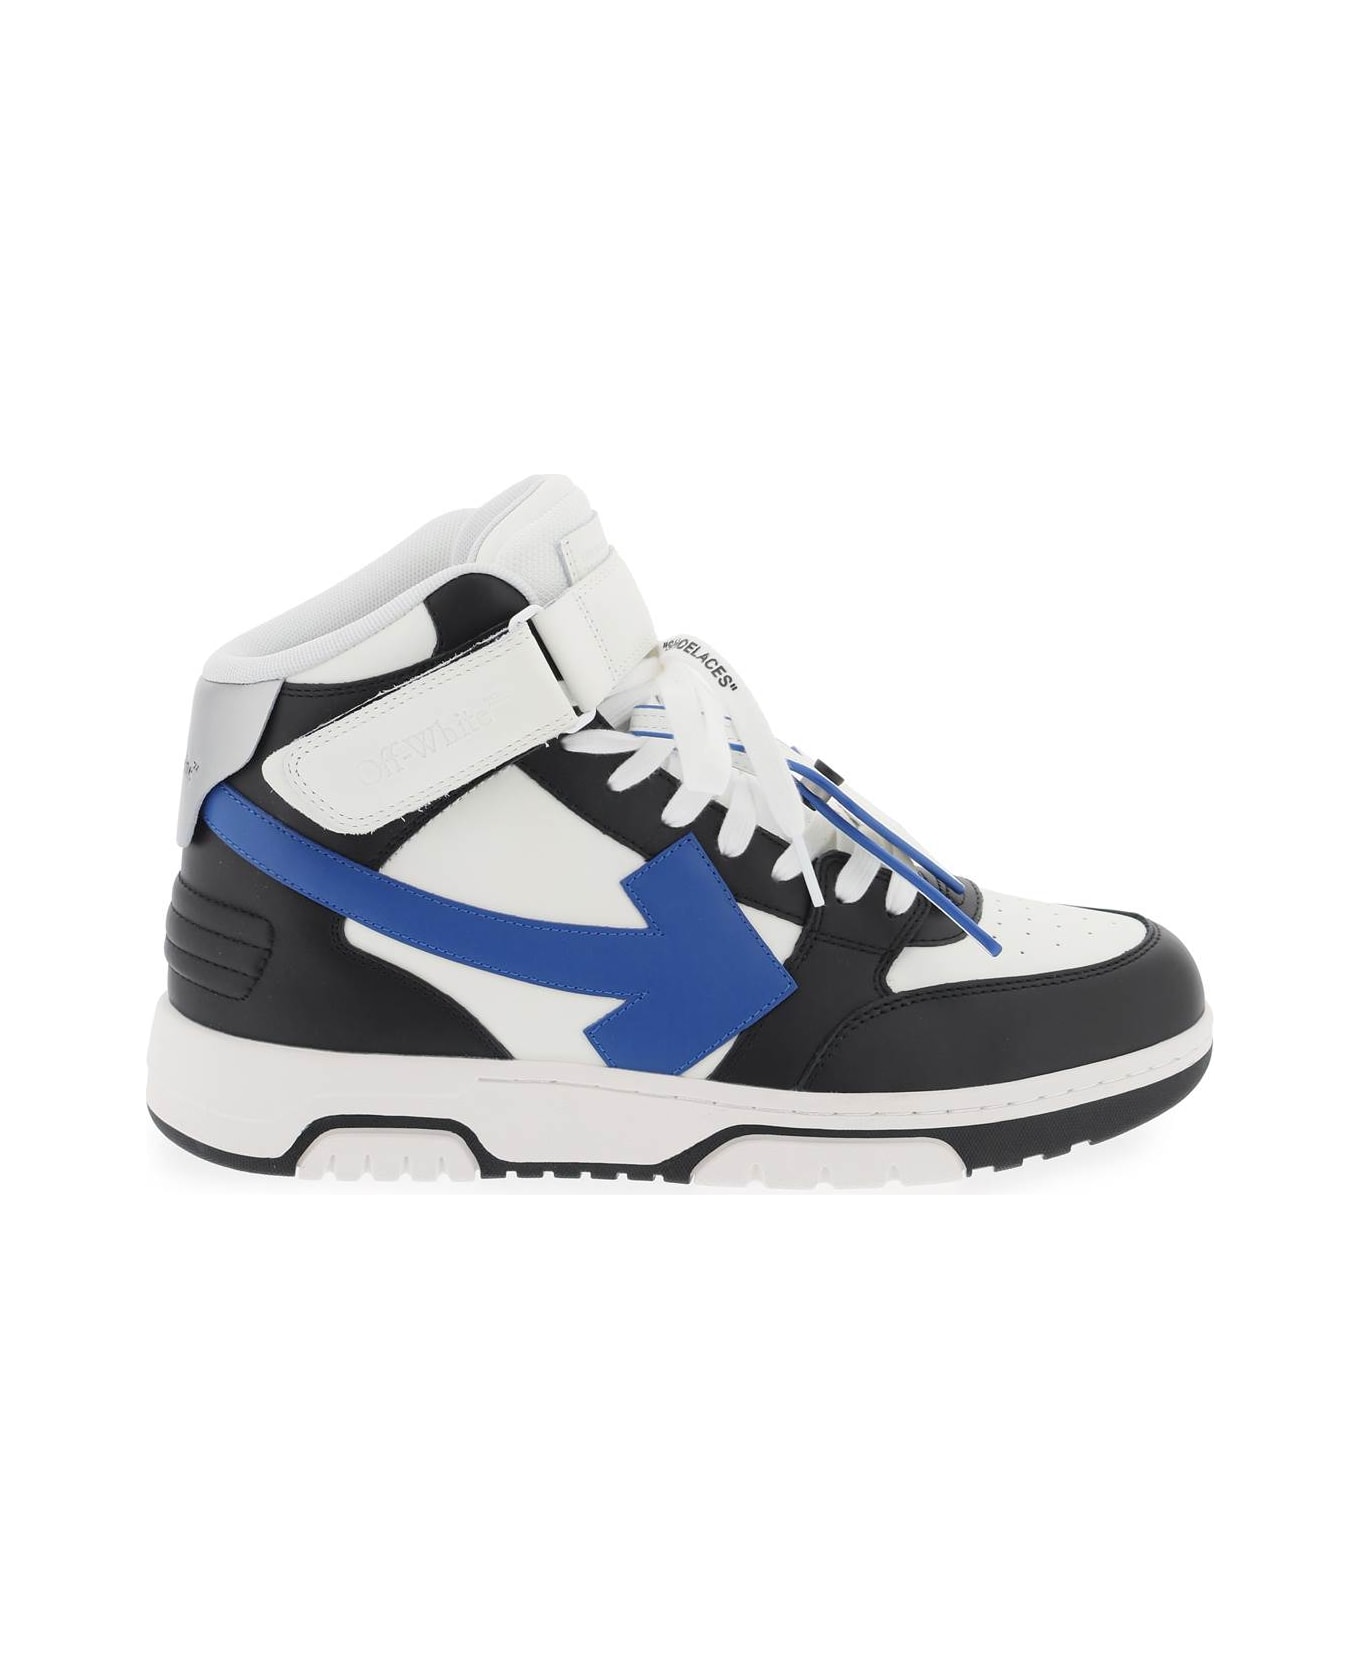 Off-White Out Of Office High Top Sneakers - BLACK NAVY BLU (White) スニーカー